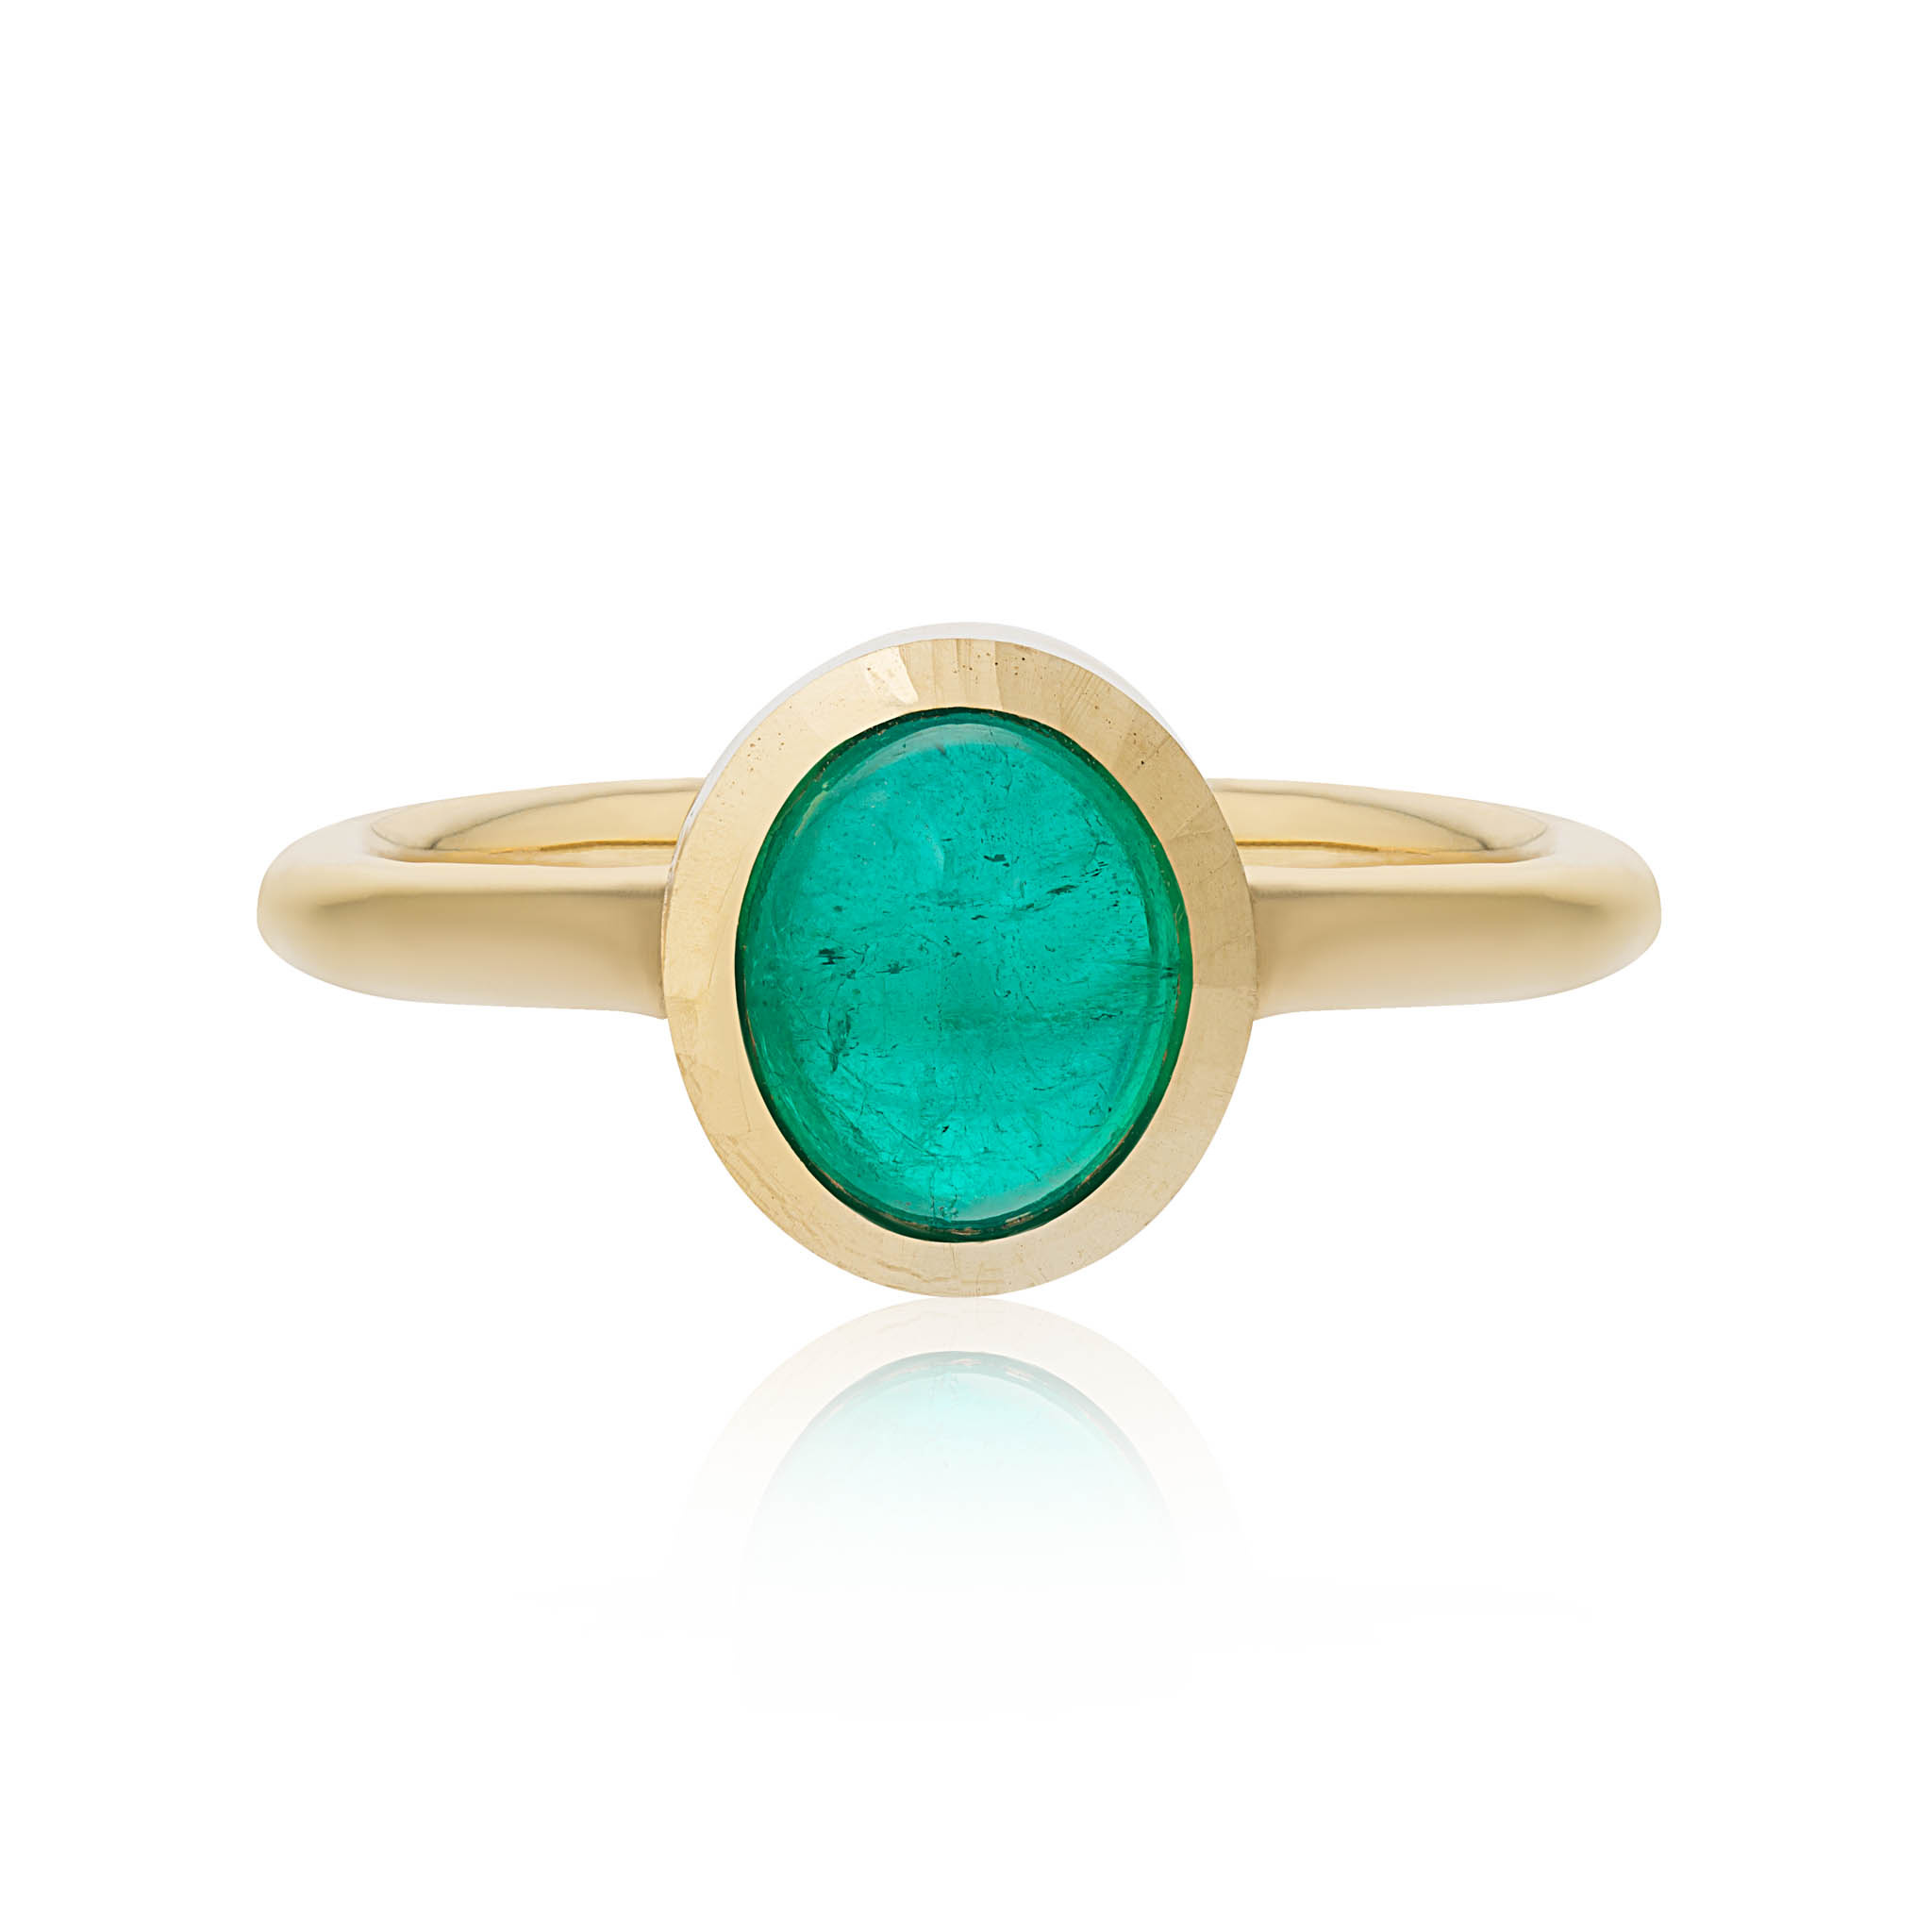 Cabochon jewelry, Colombian emerald ring, London-inspired design, Exquisite beauty, 2050x2050 HD Handy